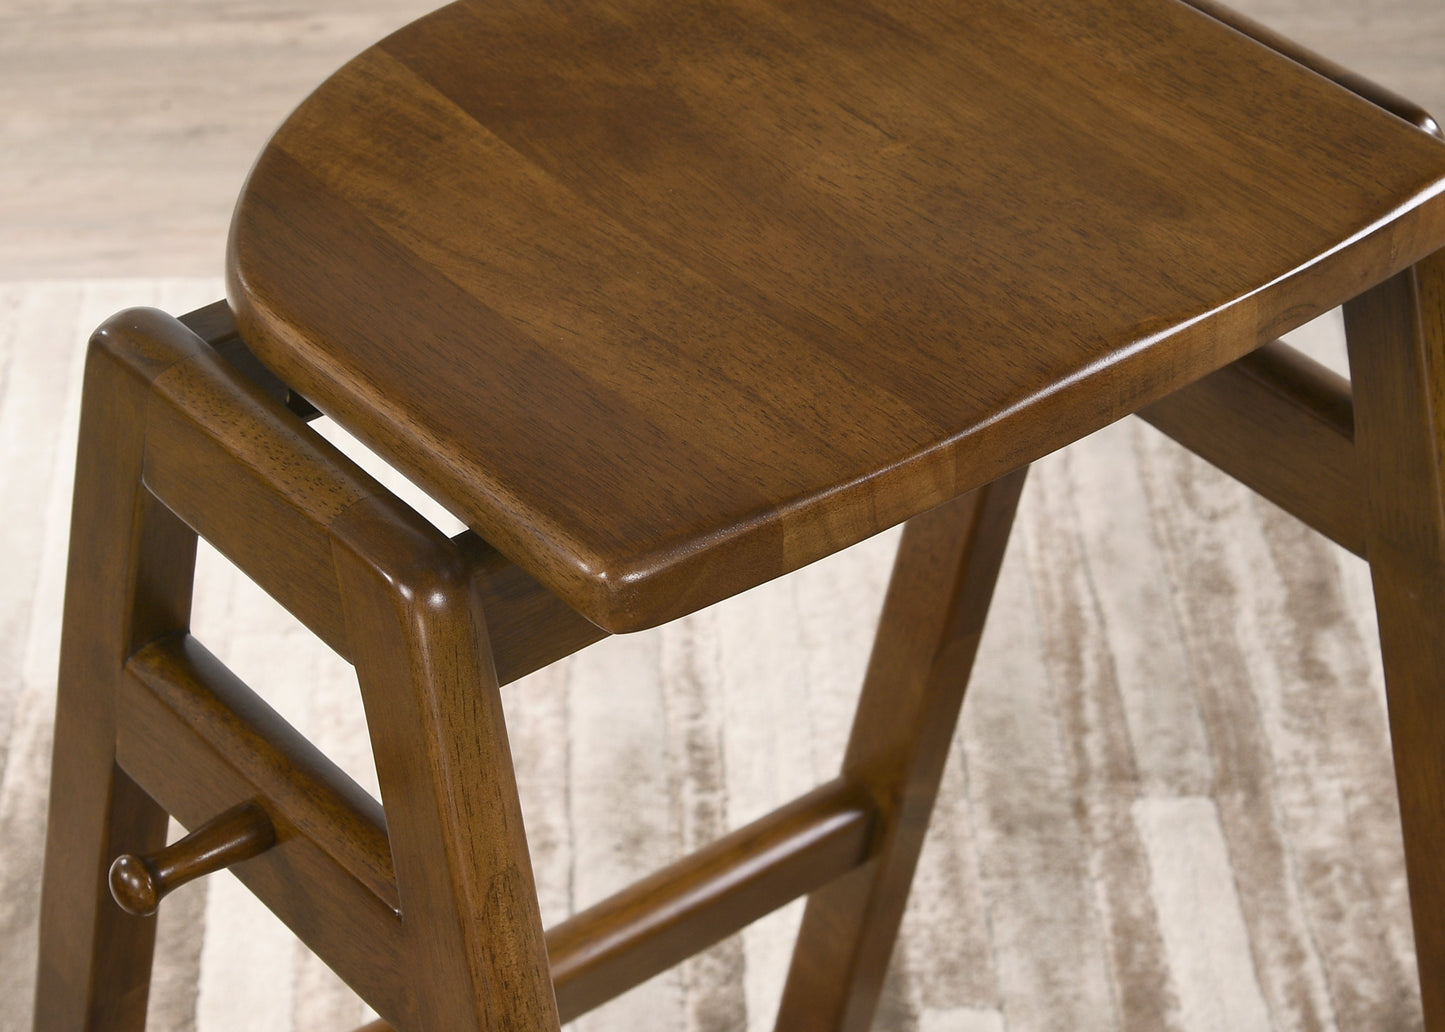 Malvern Wood Pub Table with Two Barstools